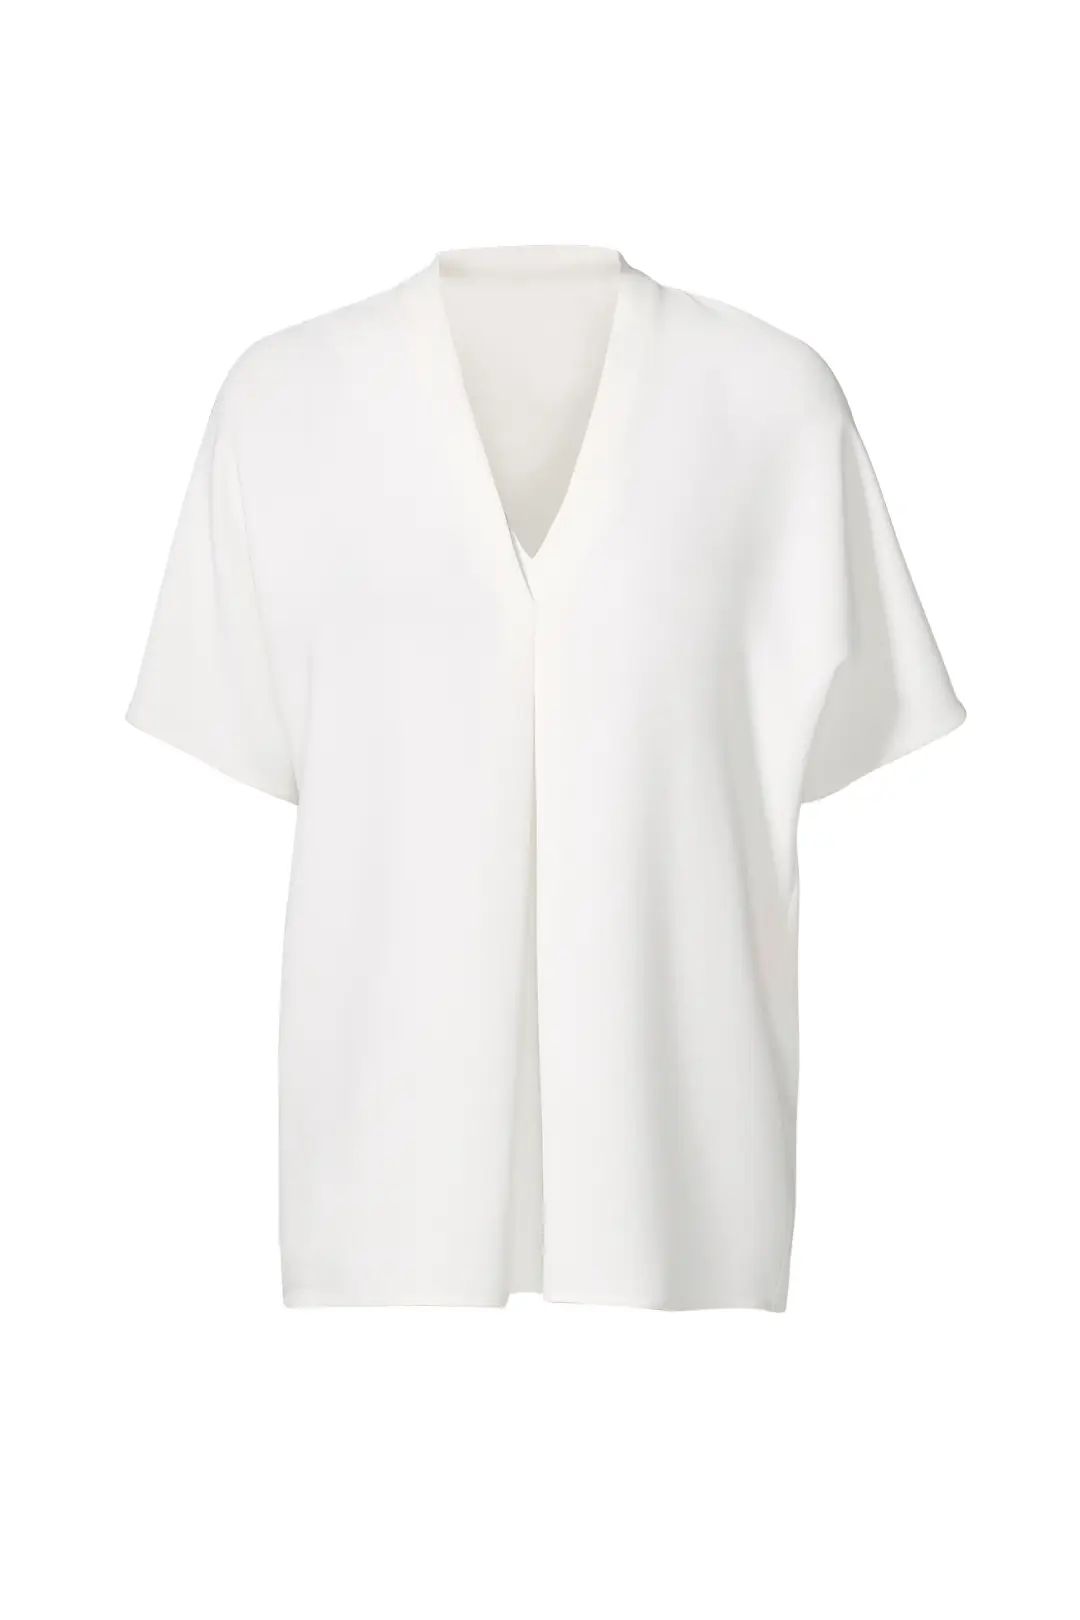 VINCE. White Short Sleeve Double V Top | Rent The Runway